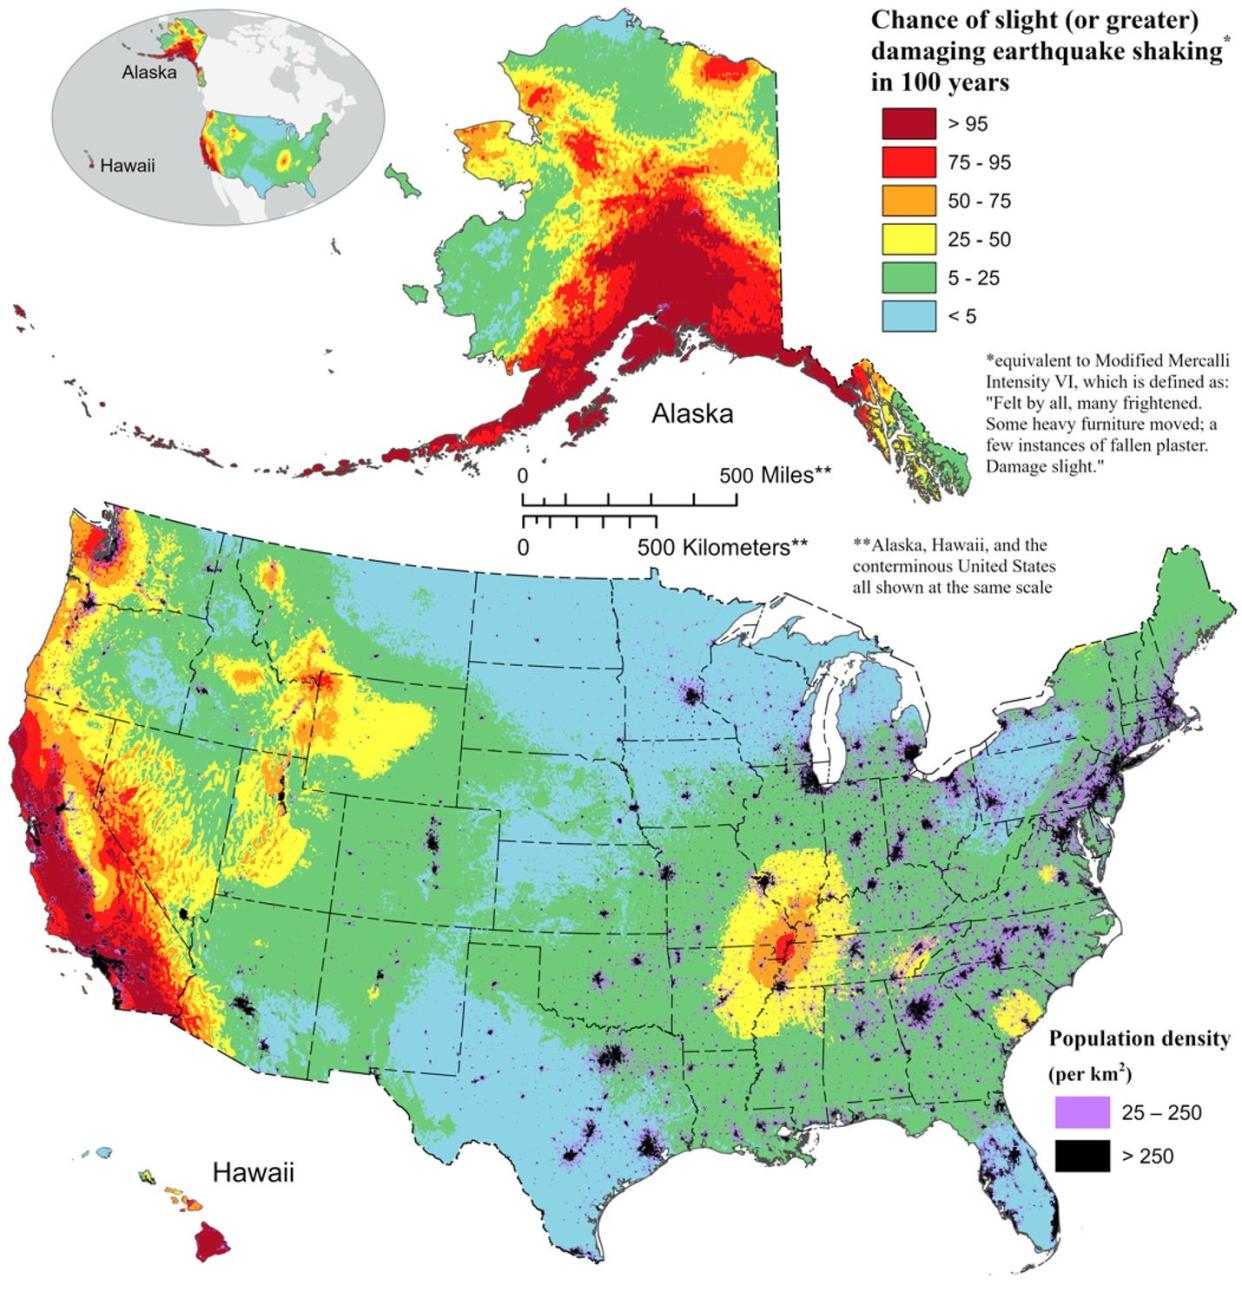 This color-coded map pinpoints where damaging earthquakes are most likely to occur in the United States over the next 100 years.